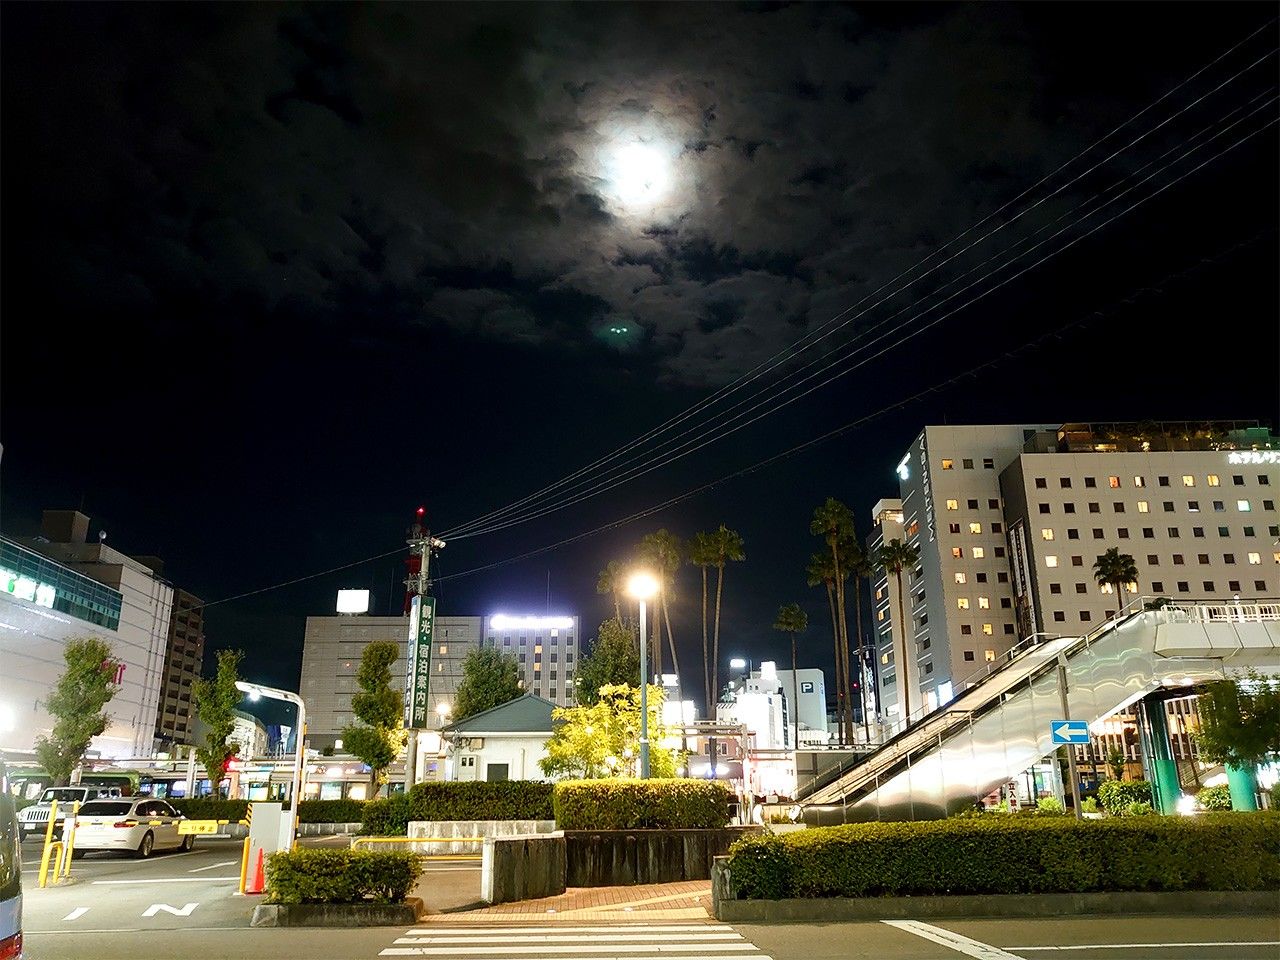 The quiet street in front of Tokushima station under the cloud-covered full moon.